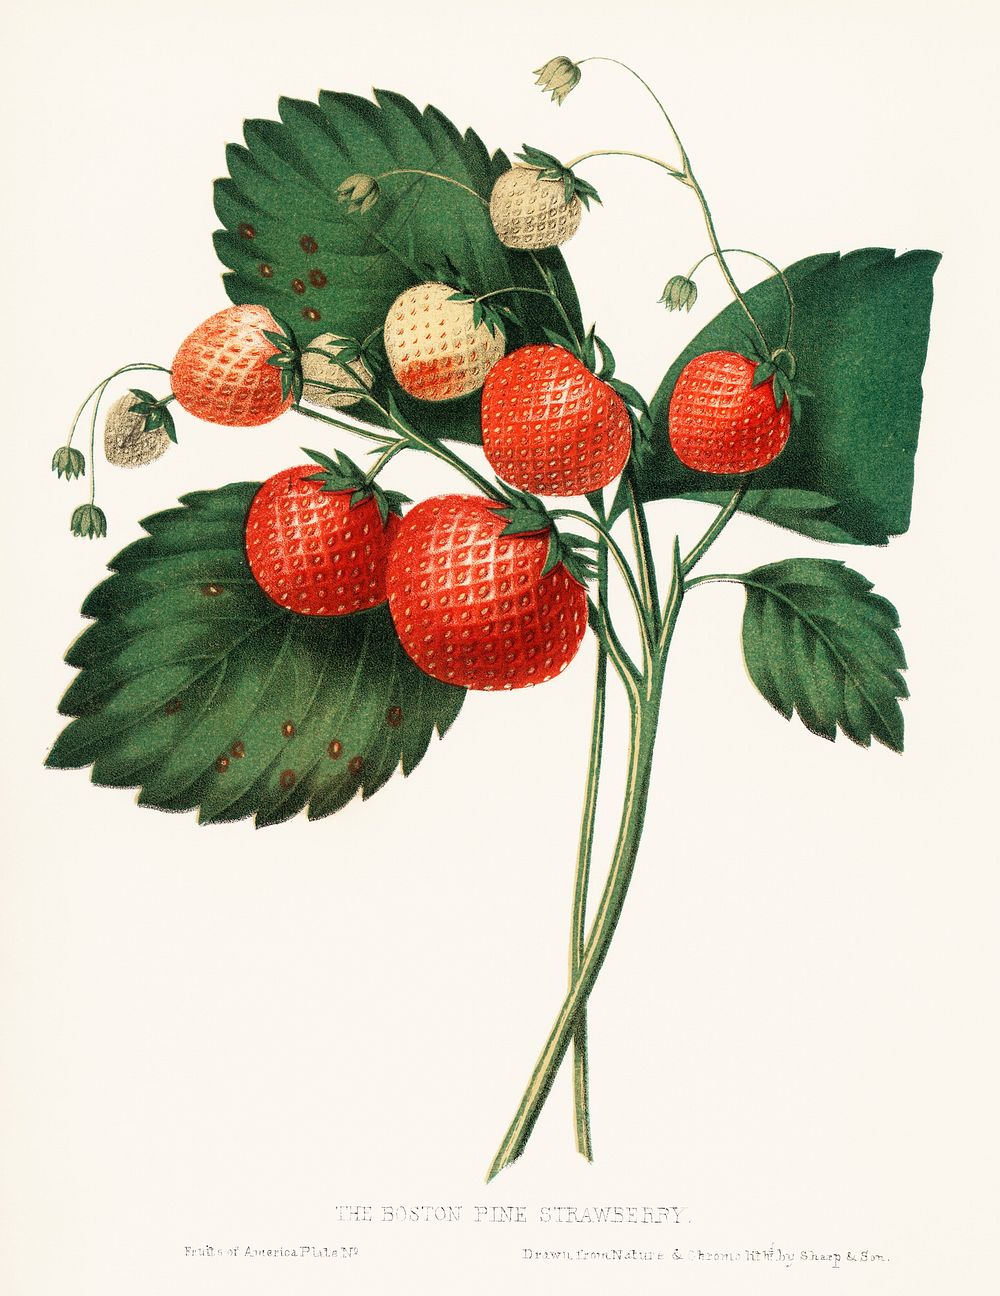 The Boston Pine Strawberry (1852) by Charles Hovey, a vintage illustration of fresh strawberries. Digitally enhanced from…